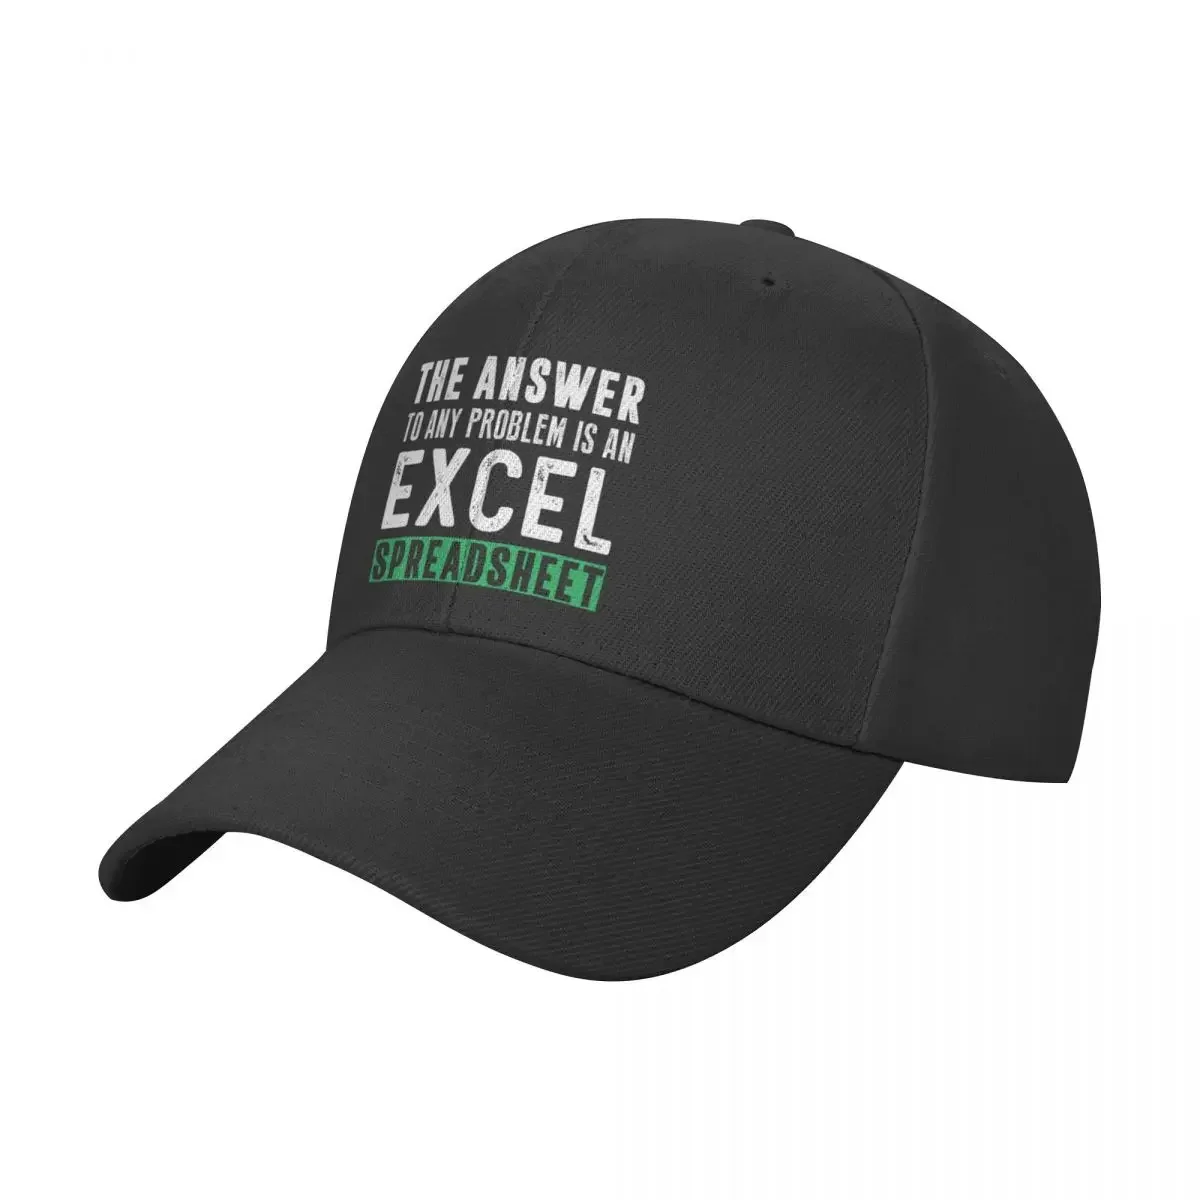 

The Answer To Any Problem is An Excel Spreadsheet Funny Gift For Excel Lover Baseball Cap party Hat Fishing cap For Women Men's